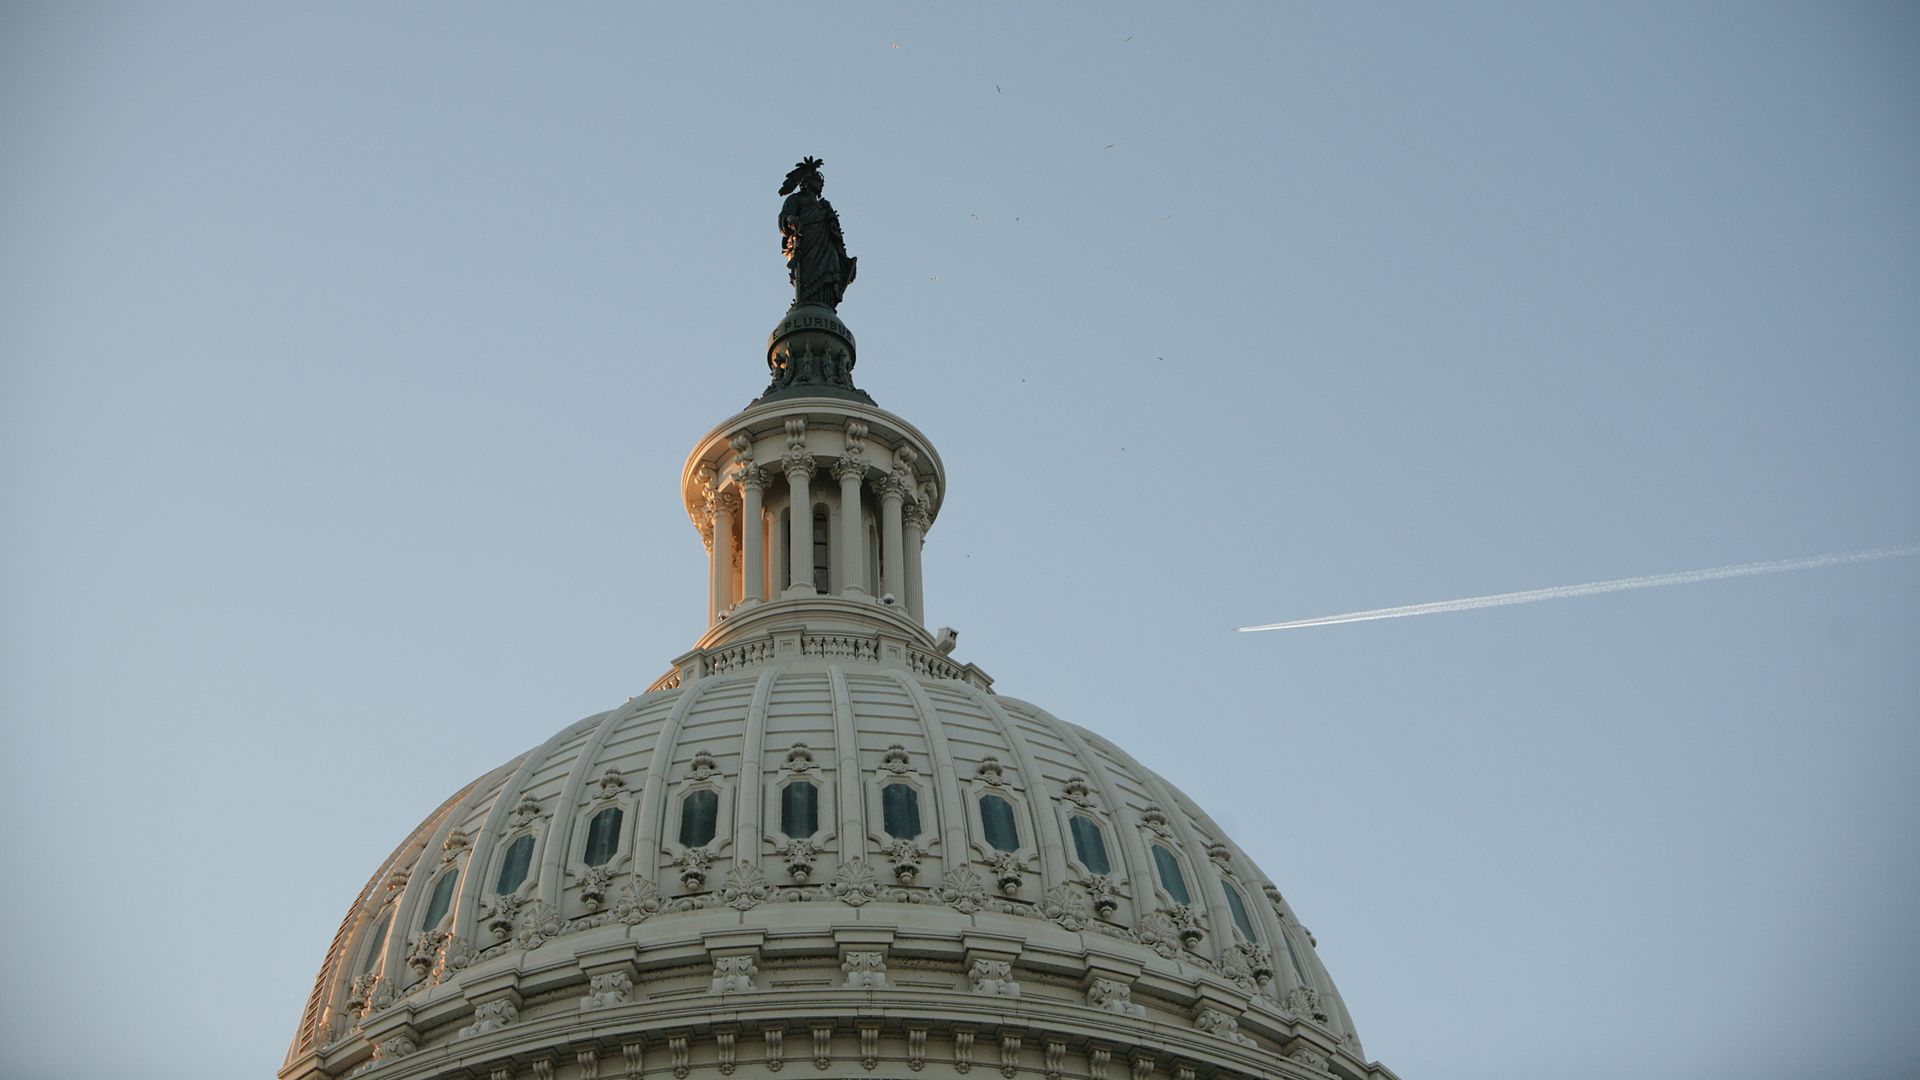 This image is a close-up of the very top of the US Capitol building.